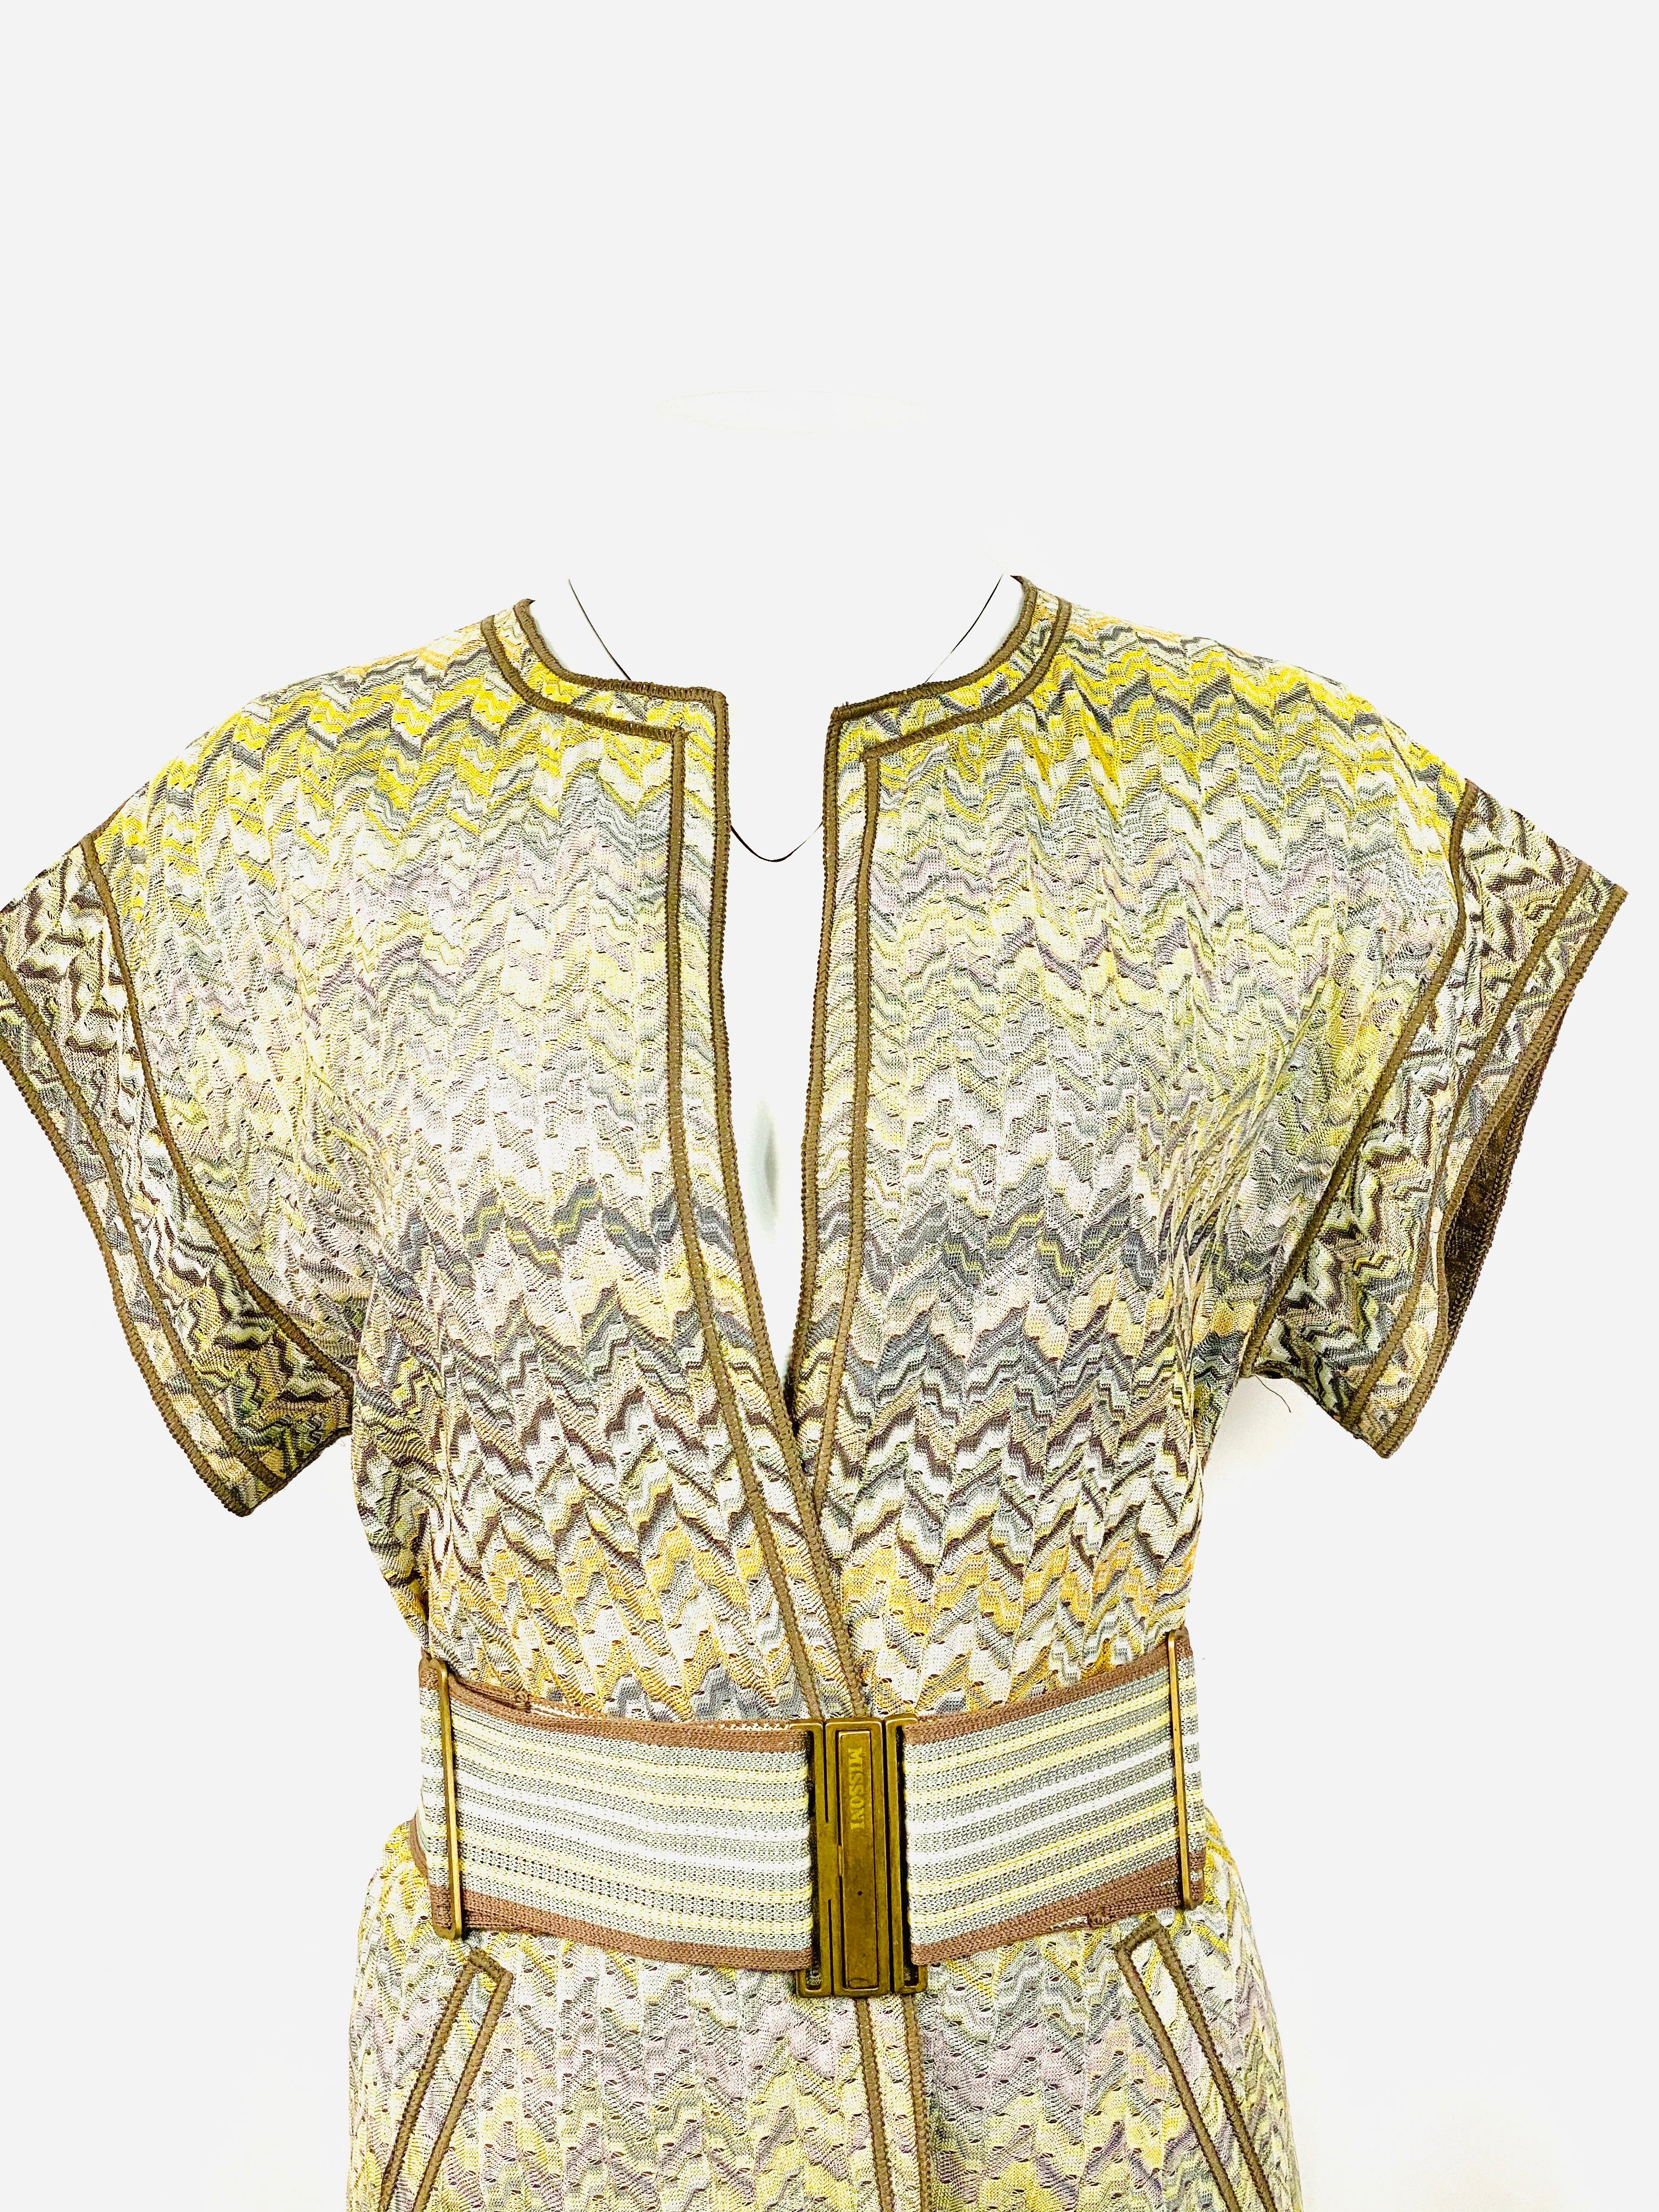 Vintage Missoni Multi Color Coat Cover Up Mini Dress w/ Belt Size 42

Product details:
Size 42
Brown/ beige and yellow with zig zag pattern 
Short sleeves 
Mini length 
Featuring adjustable belt closure detail
Slit detail on each side, measures 16